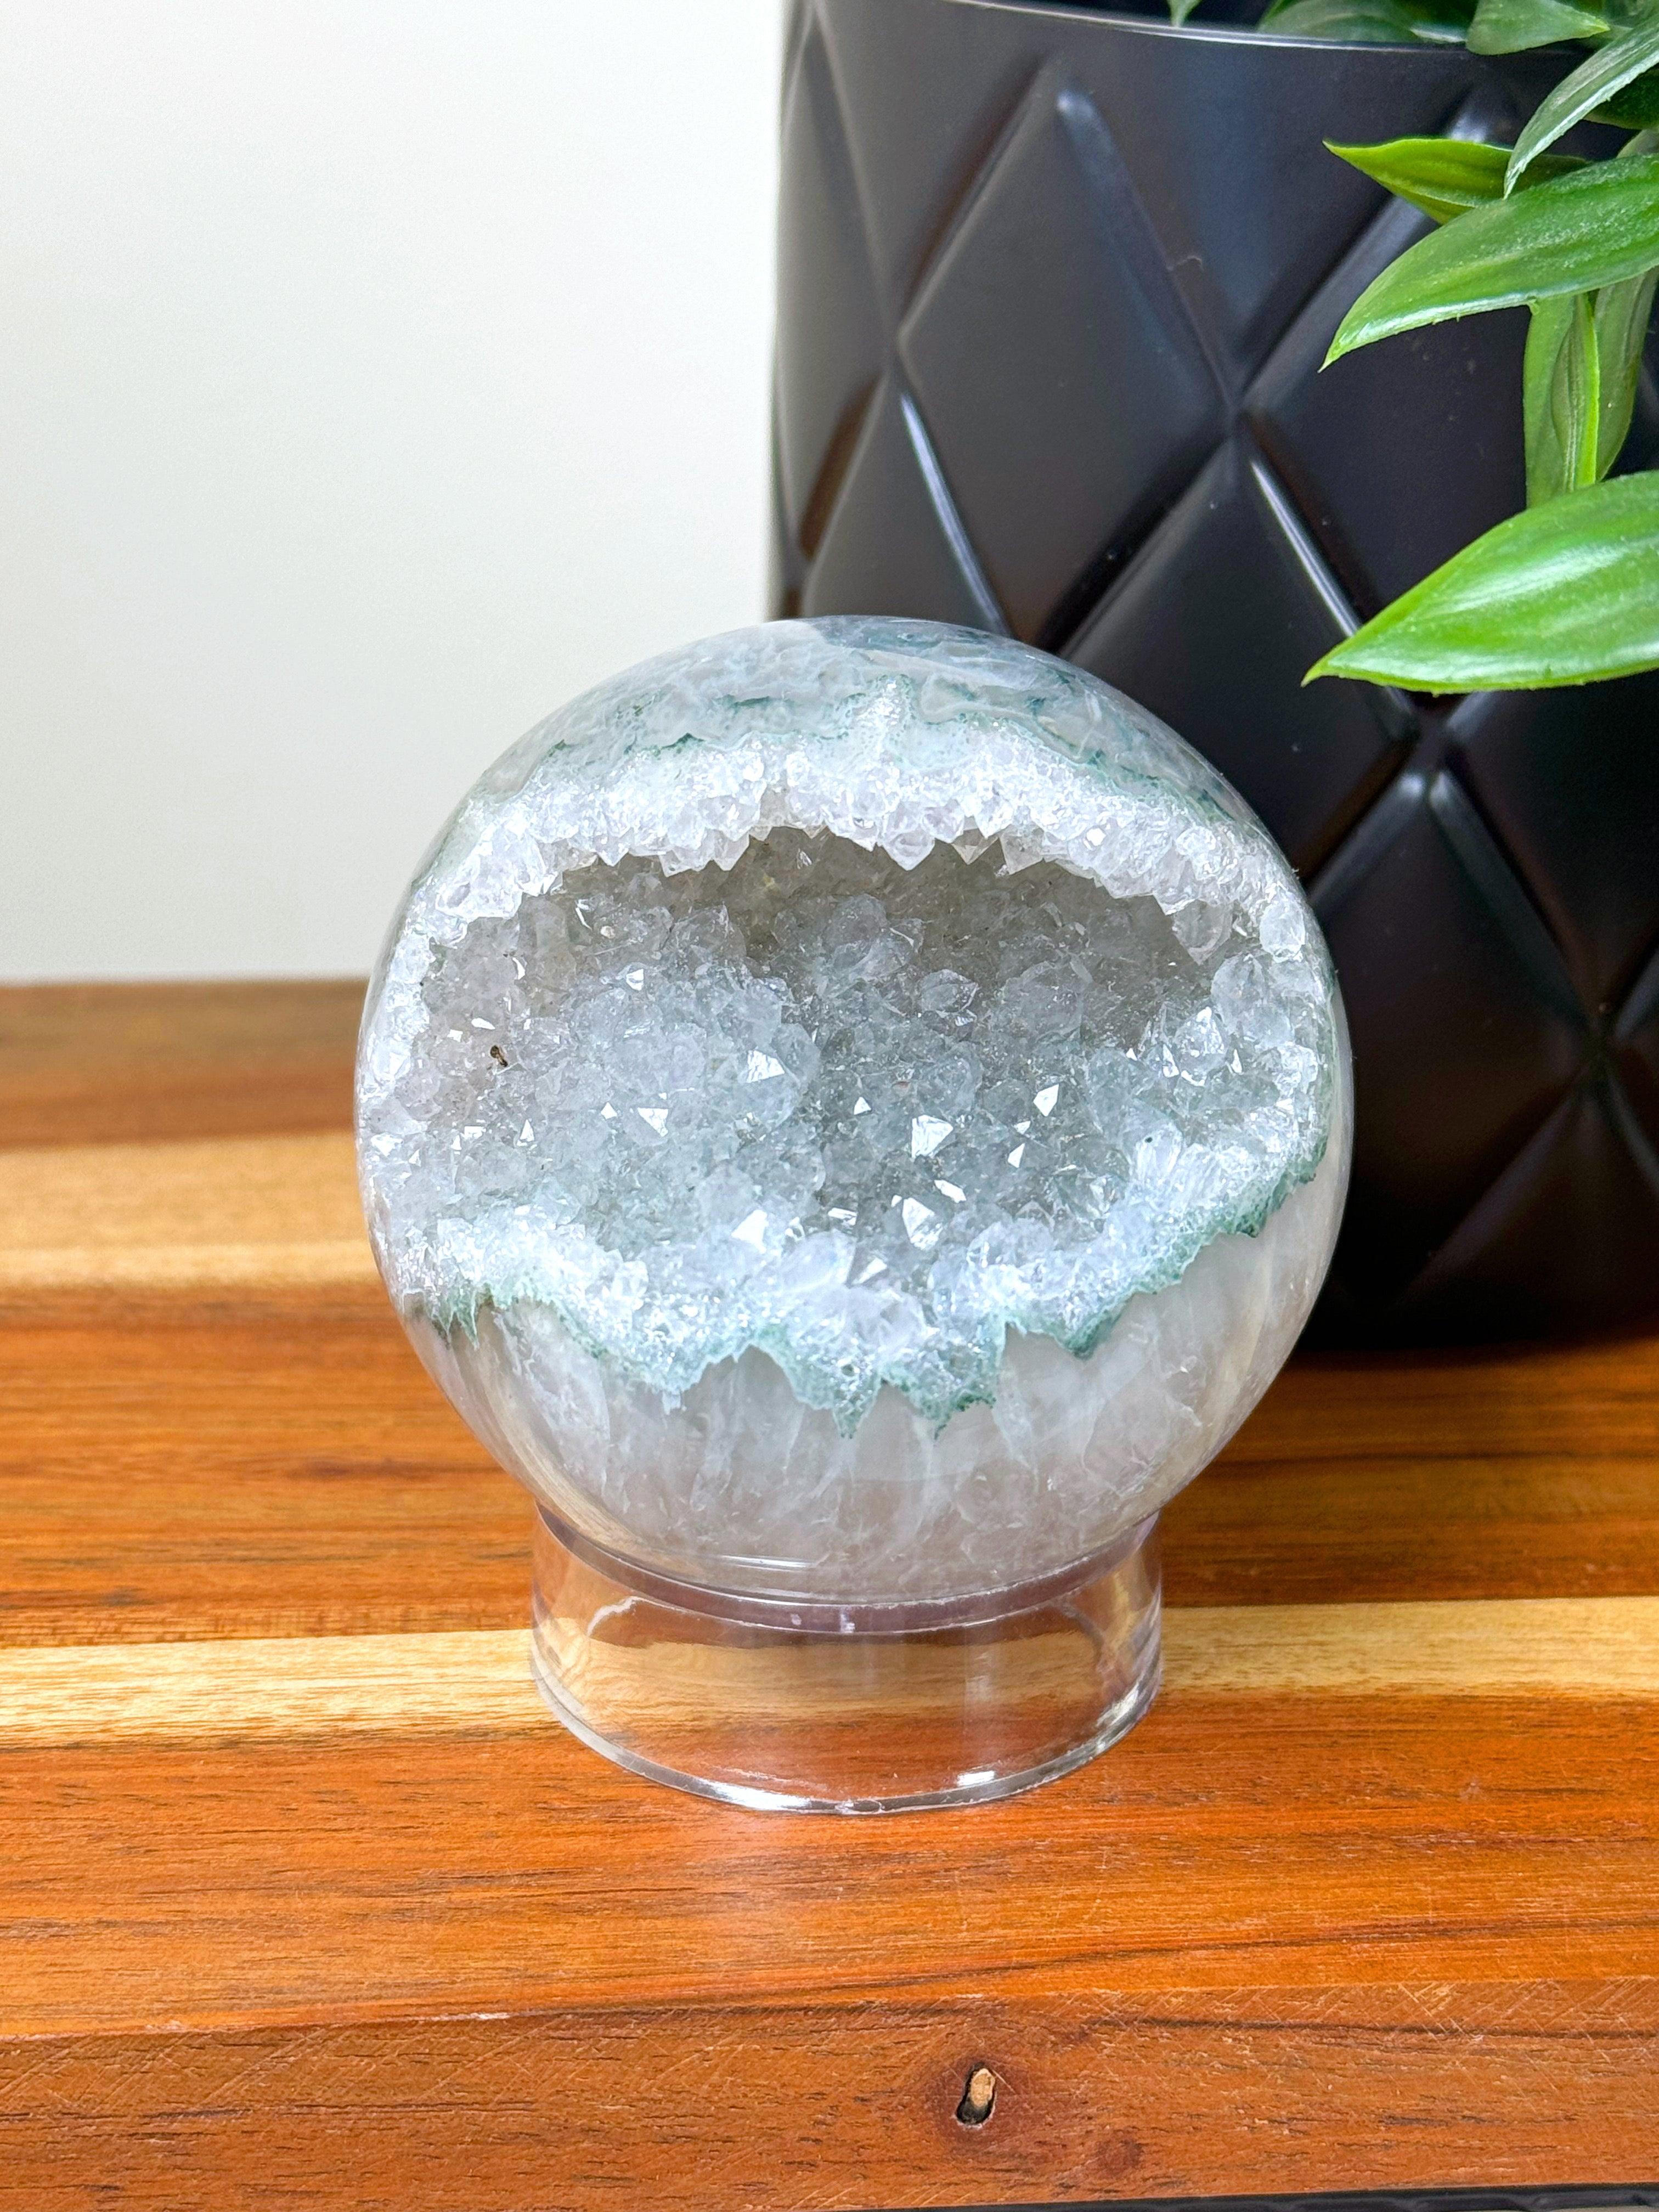 DRUZY AGATE SPHERE 9 - agate, druzy agate, googly agate, googly eye, googly eye agate, one of a kind, sphere, statement piece - The Mineral Maven